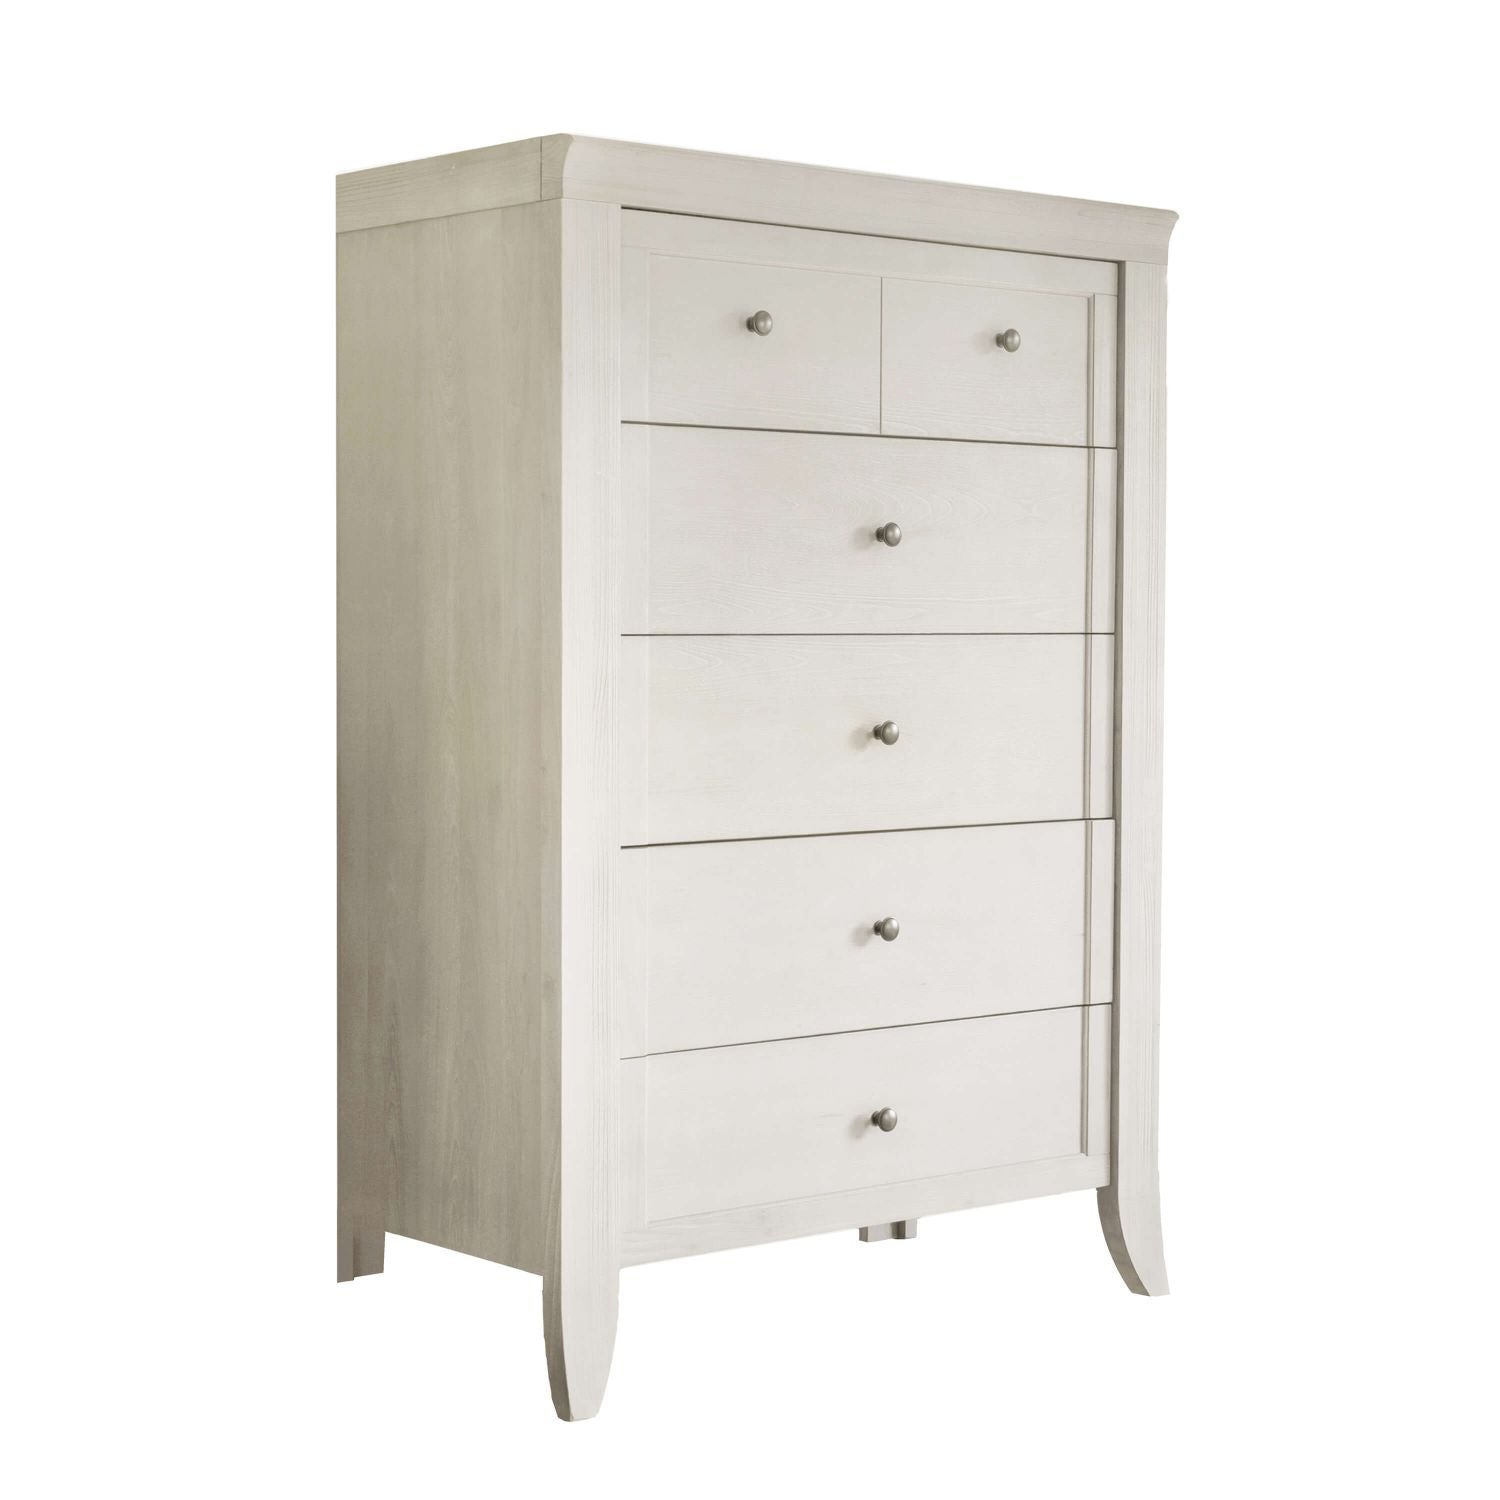 Shop the trend-setting vintage style nightstand from the CAMEO collection by Milk Street Baby.